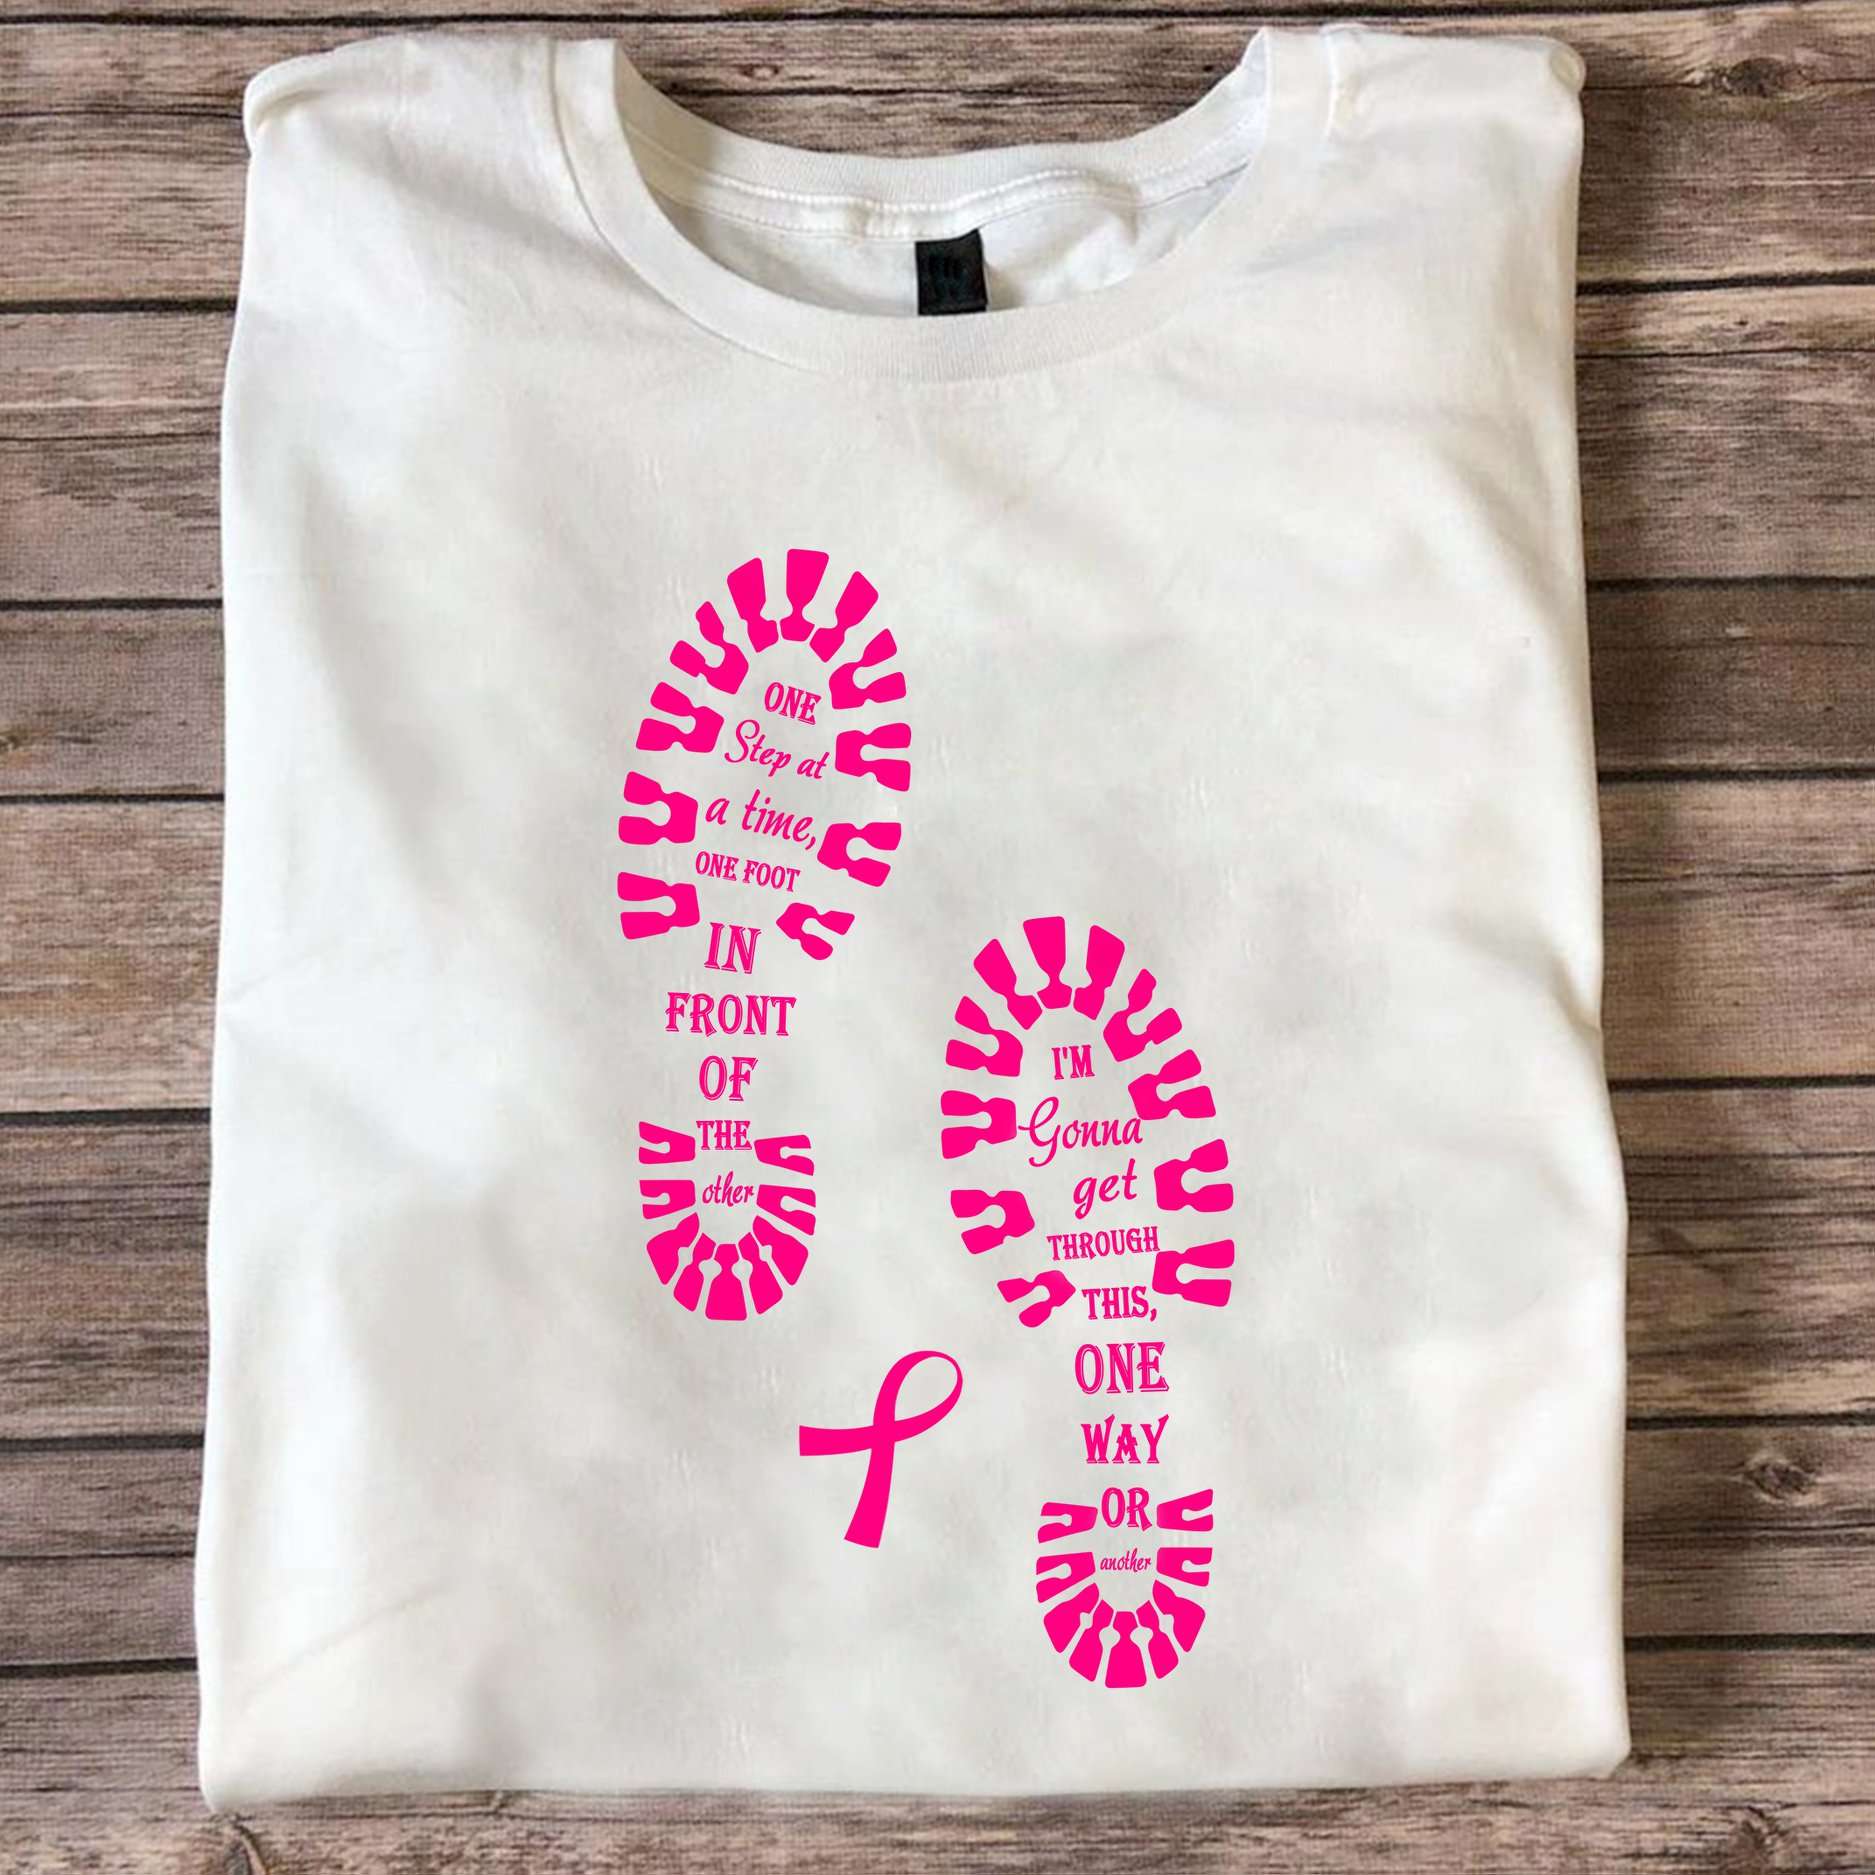 Breast Cancer Foot - One step at a time one foot in front of the other